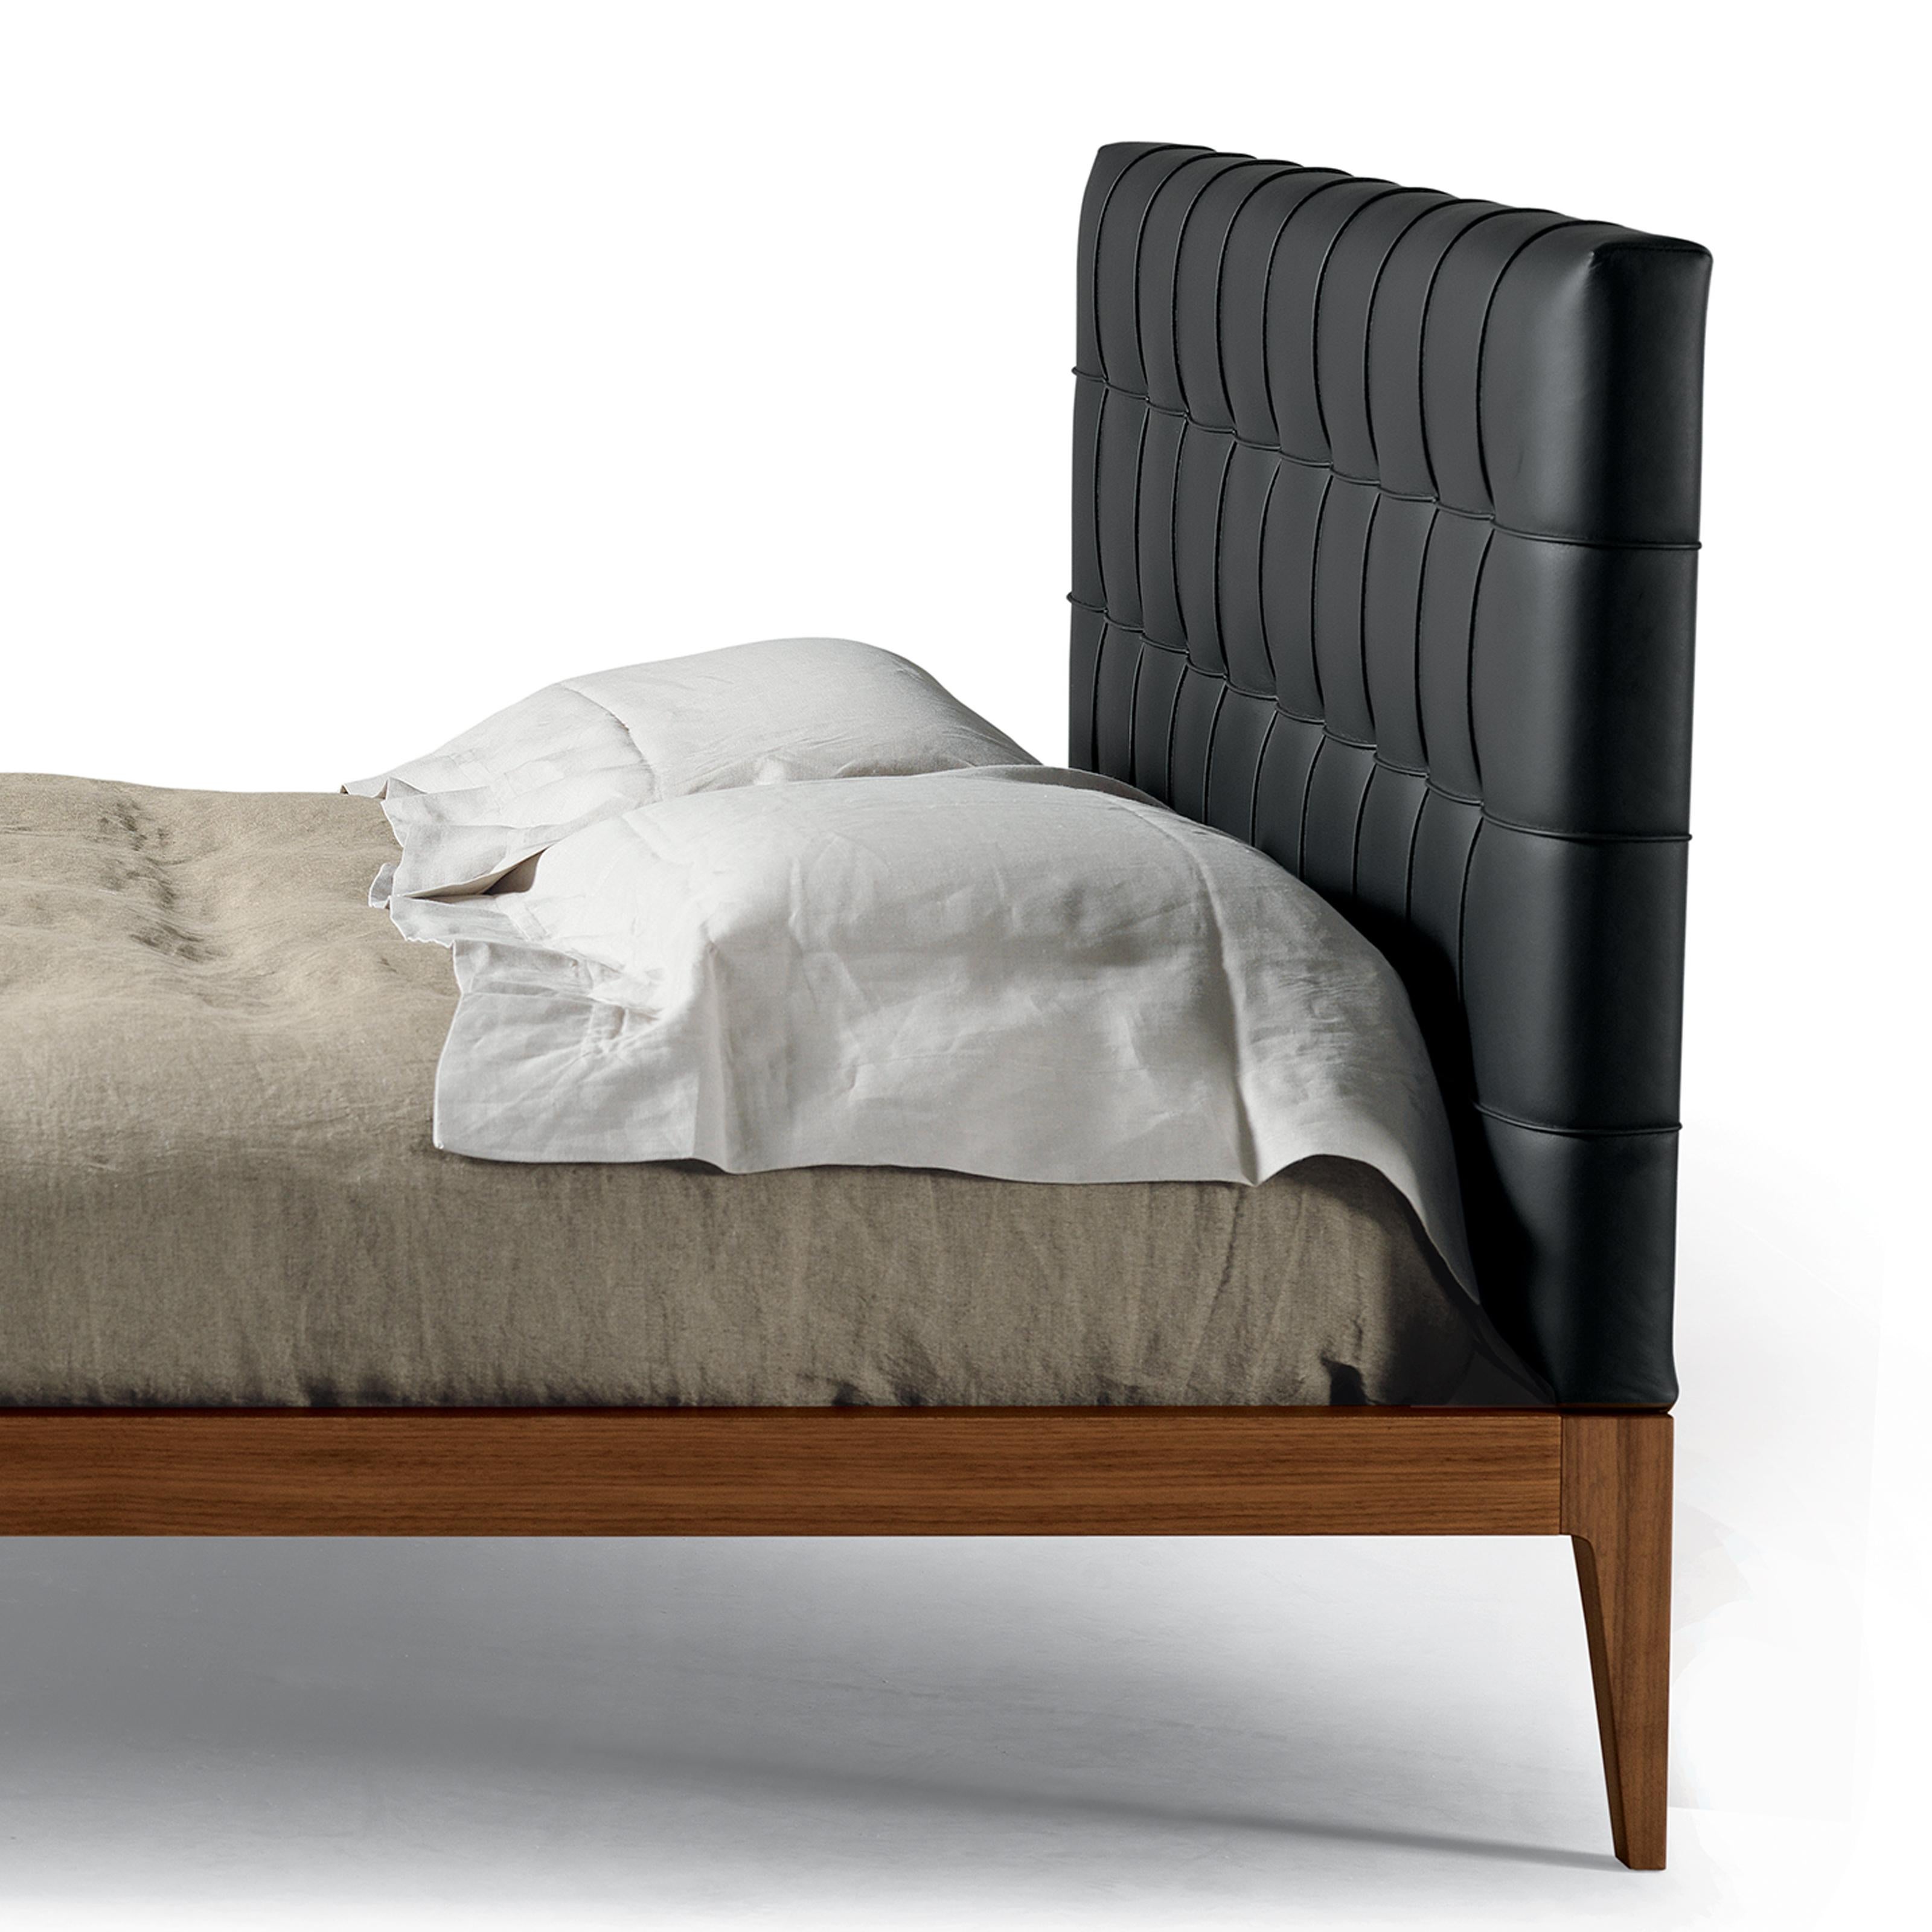 The Dale Italia collection of solid wood beds wouldn’t be complete without a bed with capitonné headboard. Sign,re becomes a statement piece thanks to its padded headboard covered in premium leather. The structure is made of solid walnut wood and